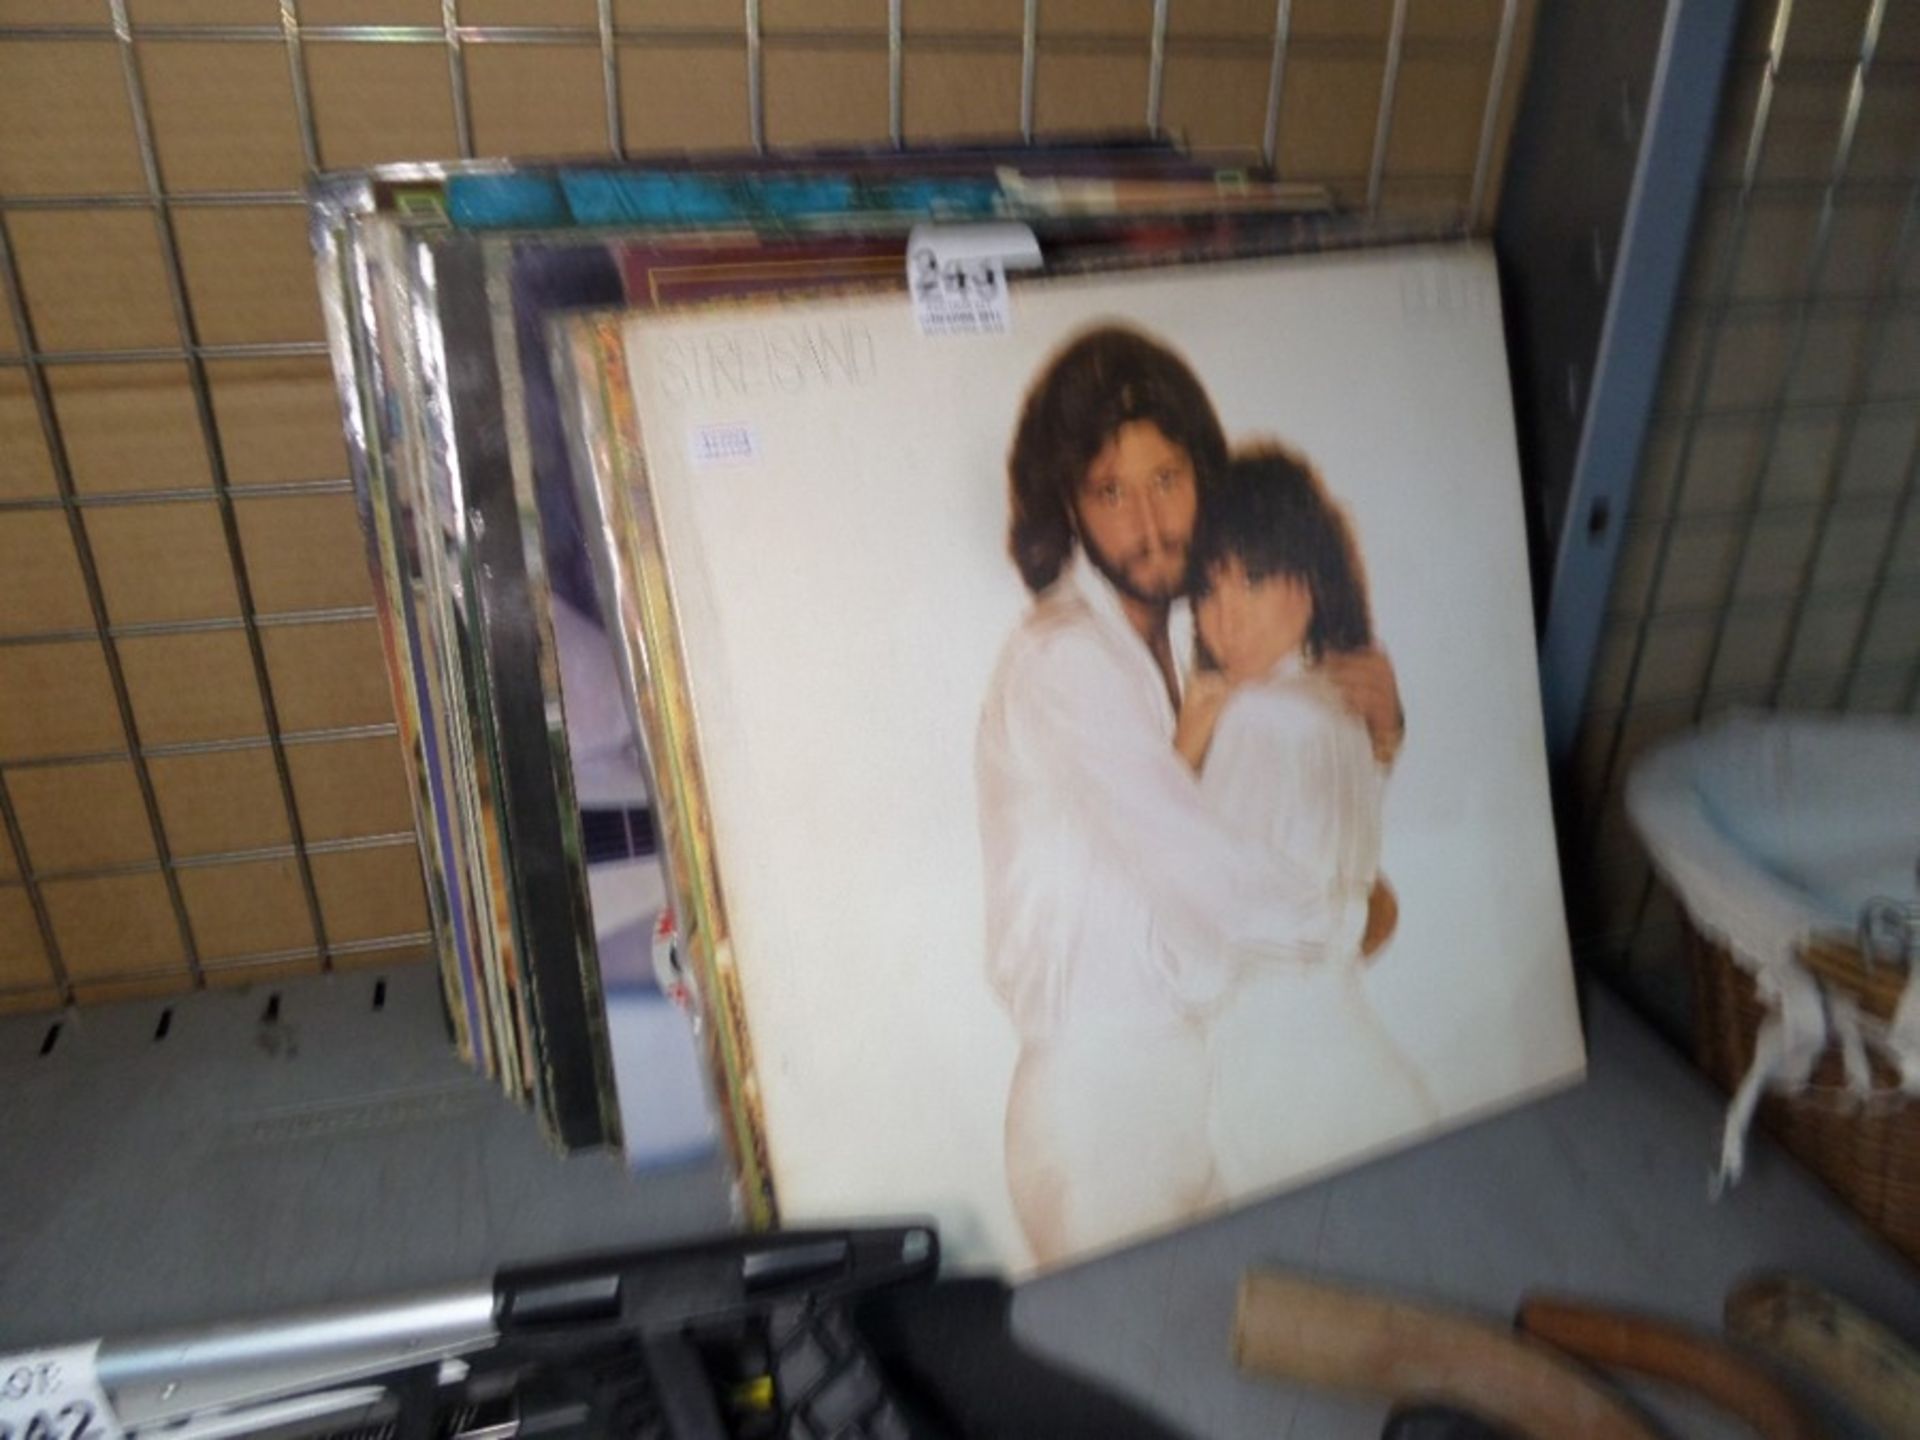 LOT OF LPS